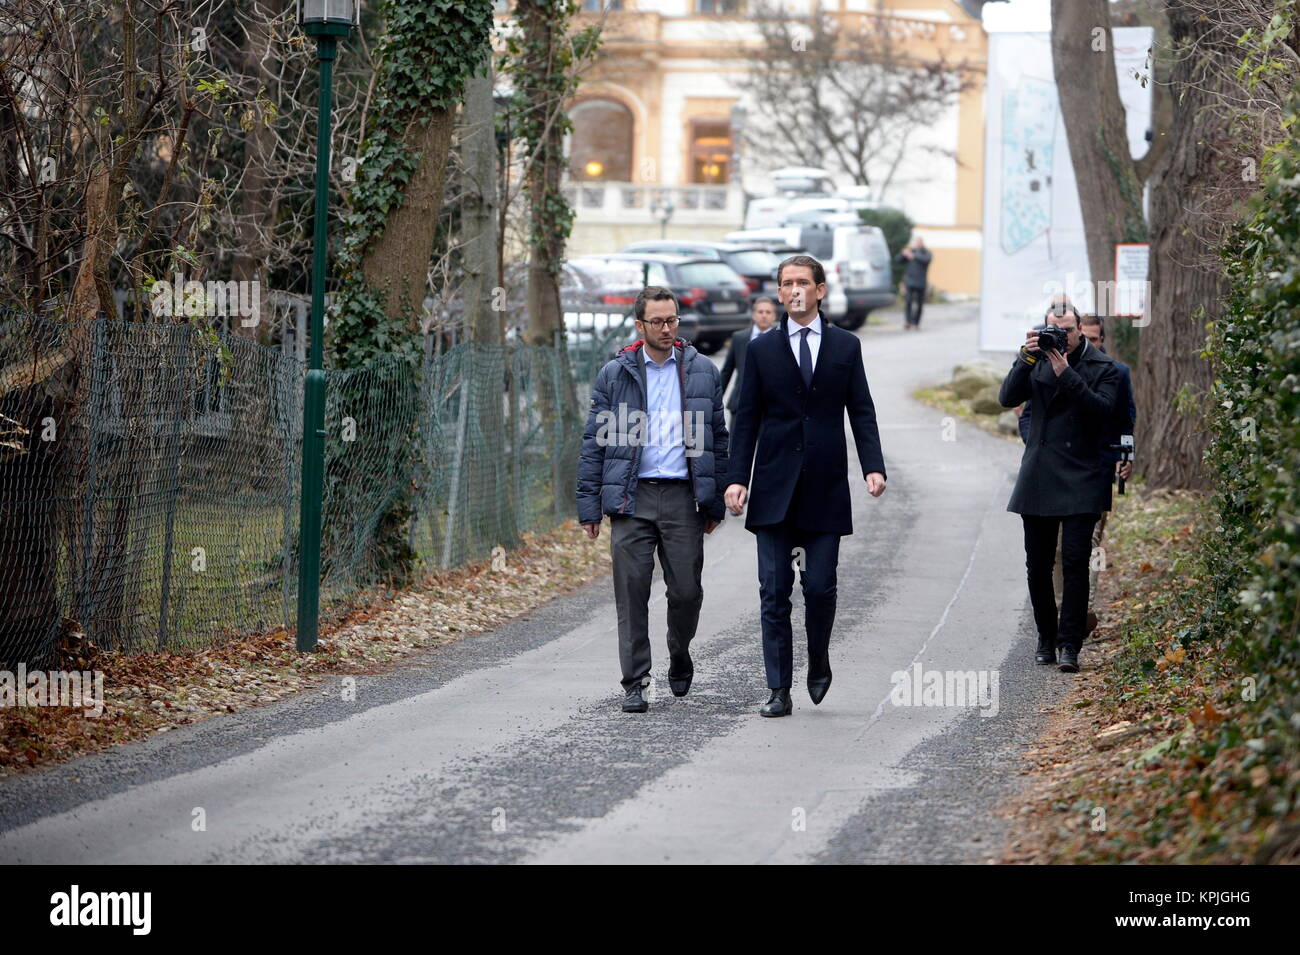 ienna. Austria. 16 December 2017. The party committees of the ÖVP (Austrian People's Party) have today in the party committees for the coalition negotiations advise. After that, the future Austrian Chancellor and his team faced the media. Credit: The picture shows the new Austrian Chancellor Sebastian Kurz (R). Credit: Franz Perc / Alamy Live News Stock Photo